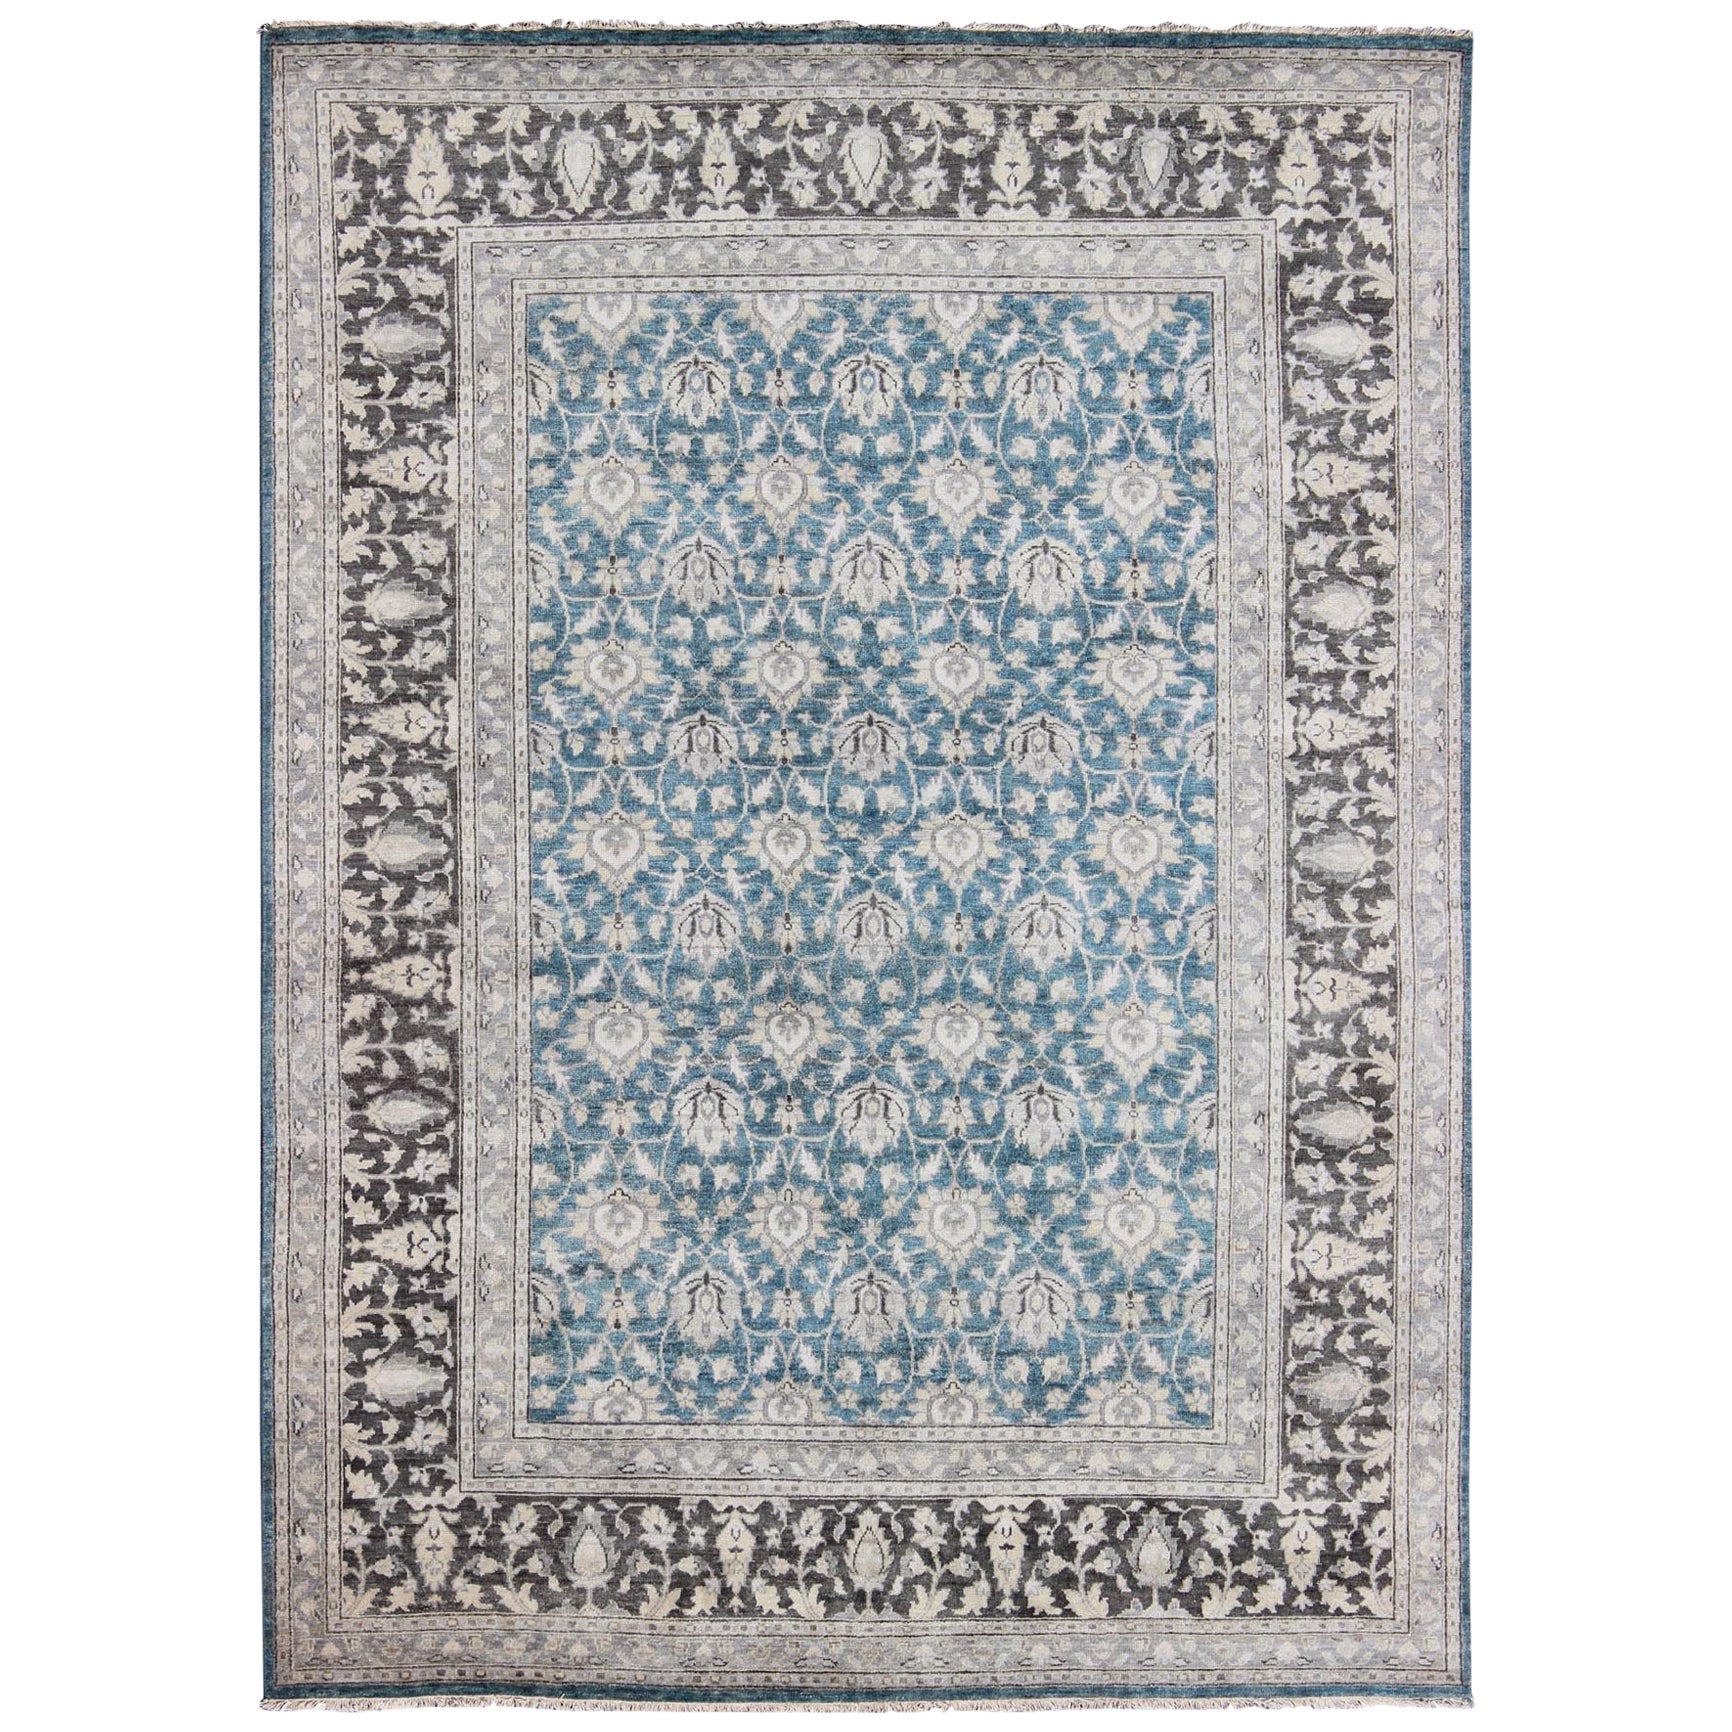 Modern Tabriz Rug in Wool with All-Over Design in Blue, Gray and Brown